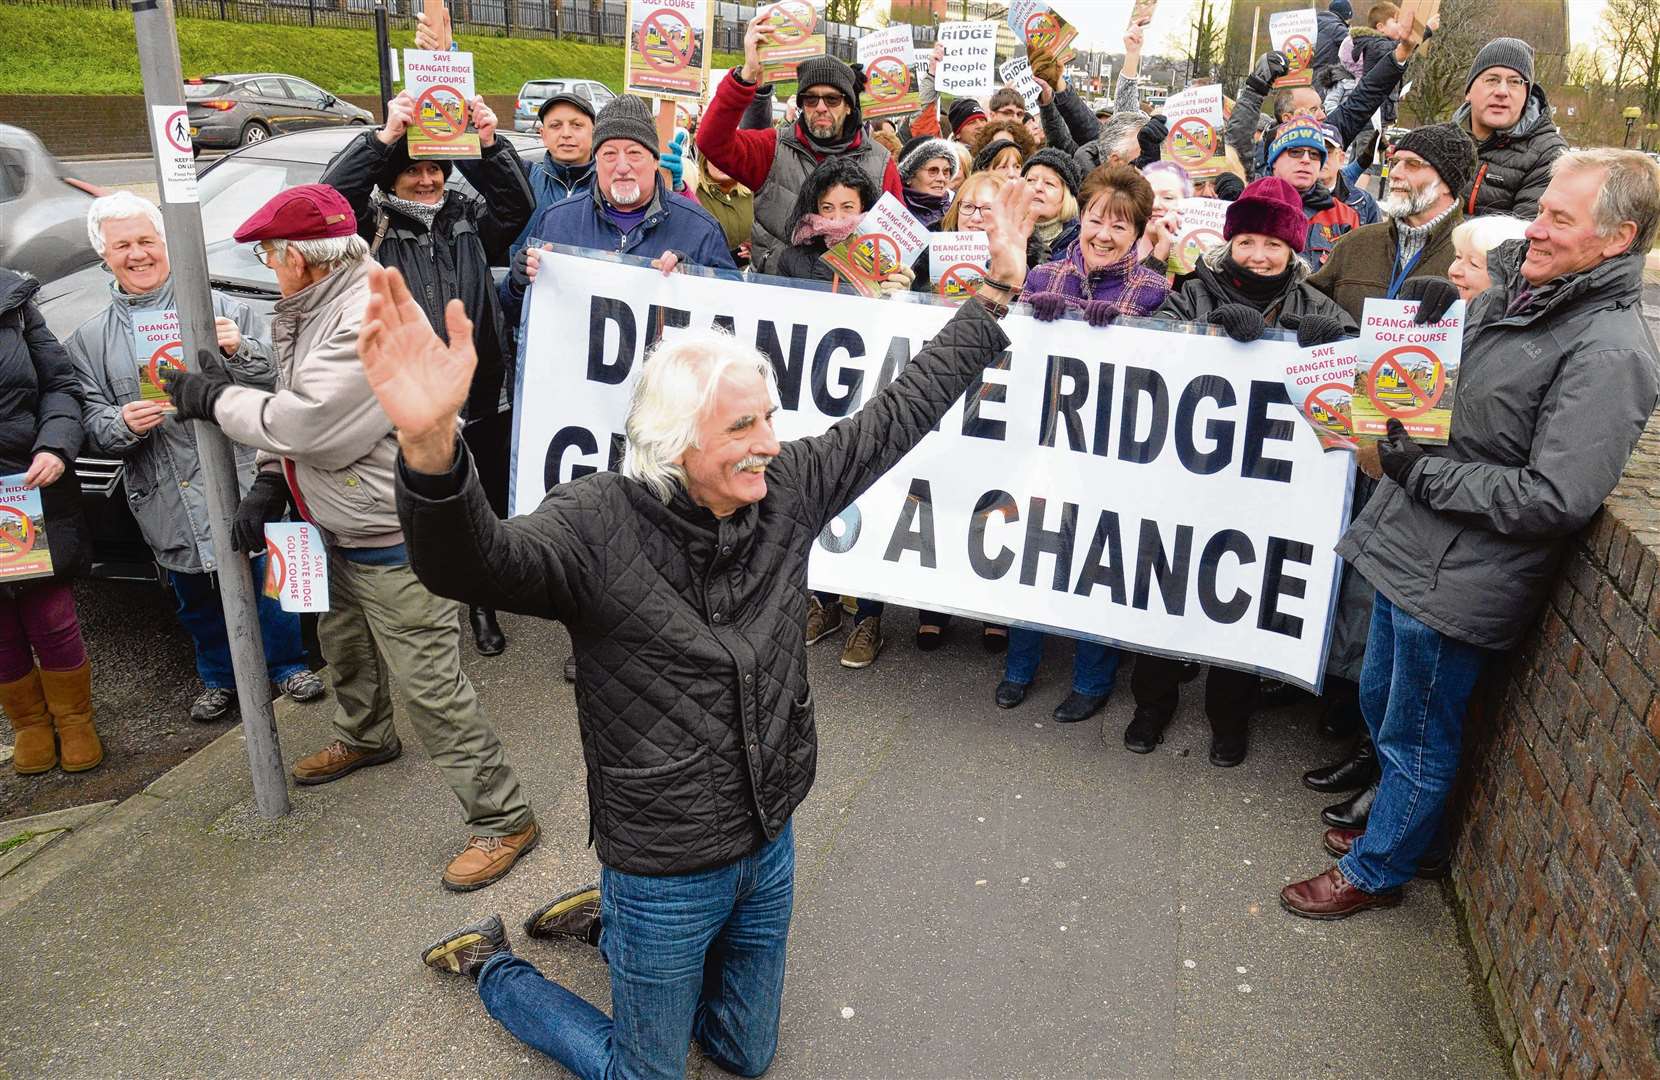 George Crozer leads the protest against the closure of Deangate Ridge Golf Course outside the Medway Council offices in Gun Wharf . Picture: Chris Davey